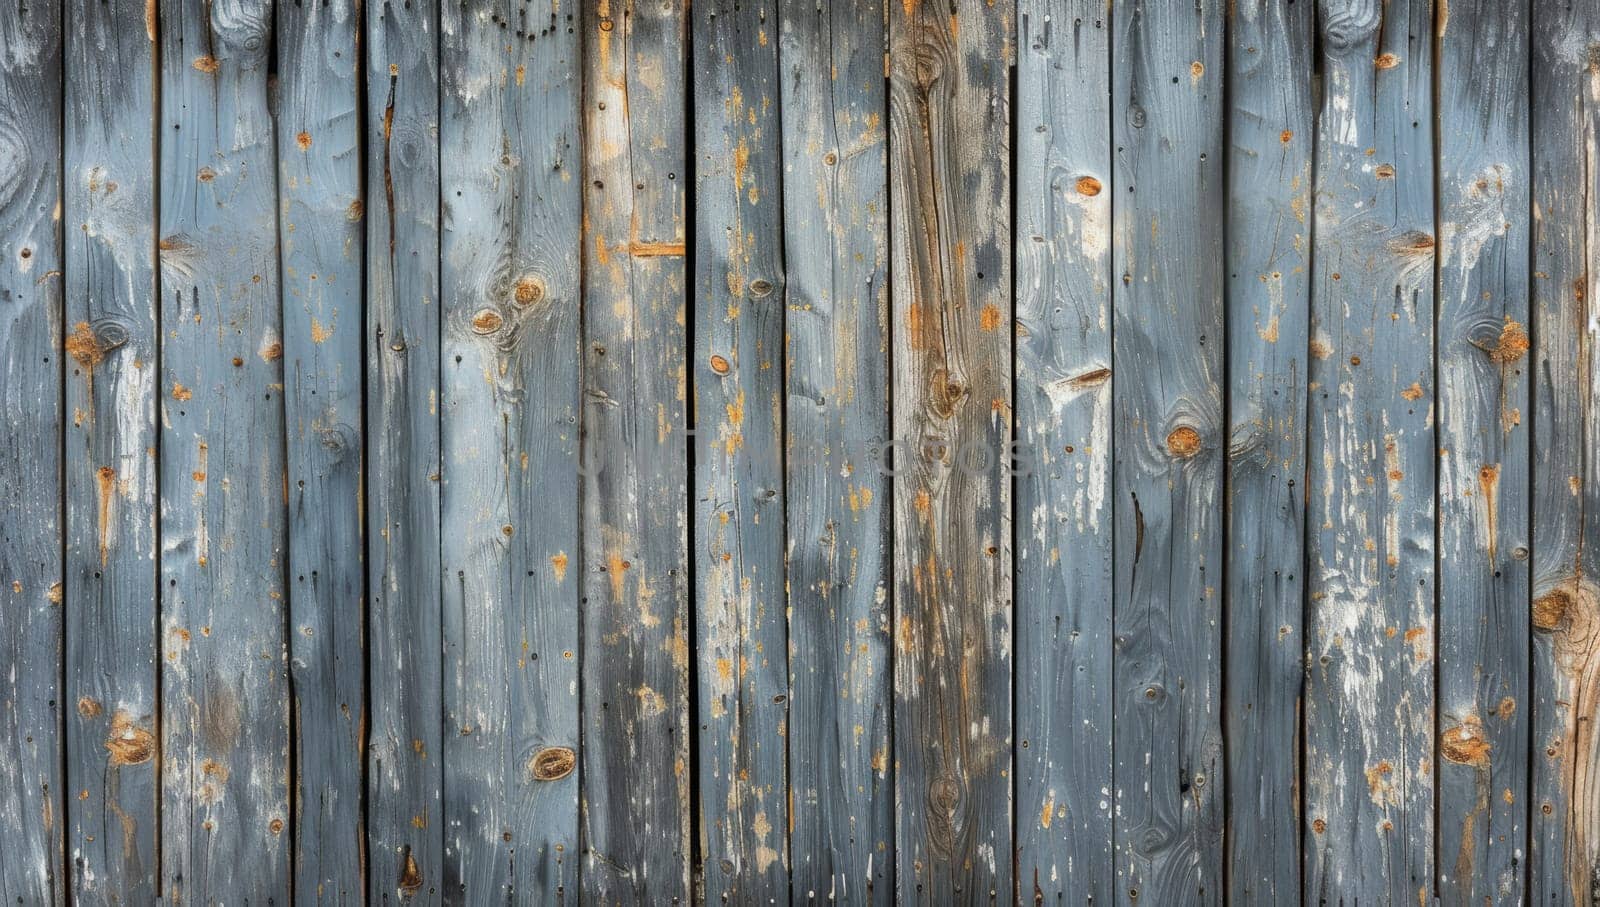 Rustic weathered wooden fence texture background. Aged blue gray wood planks with peeling paint and nail holes.